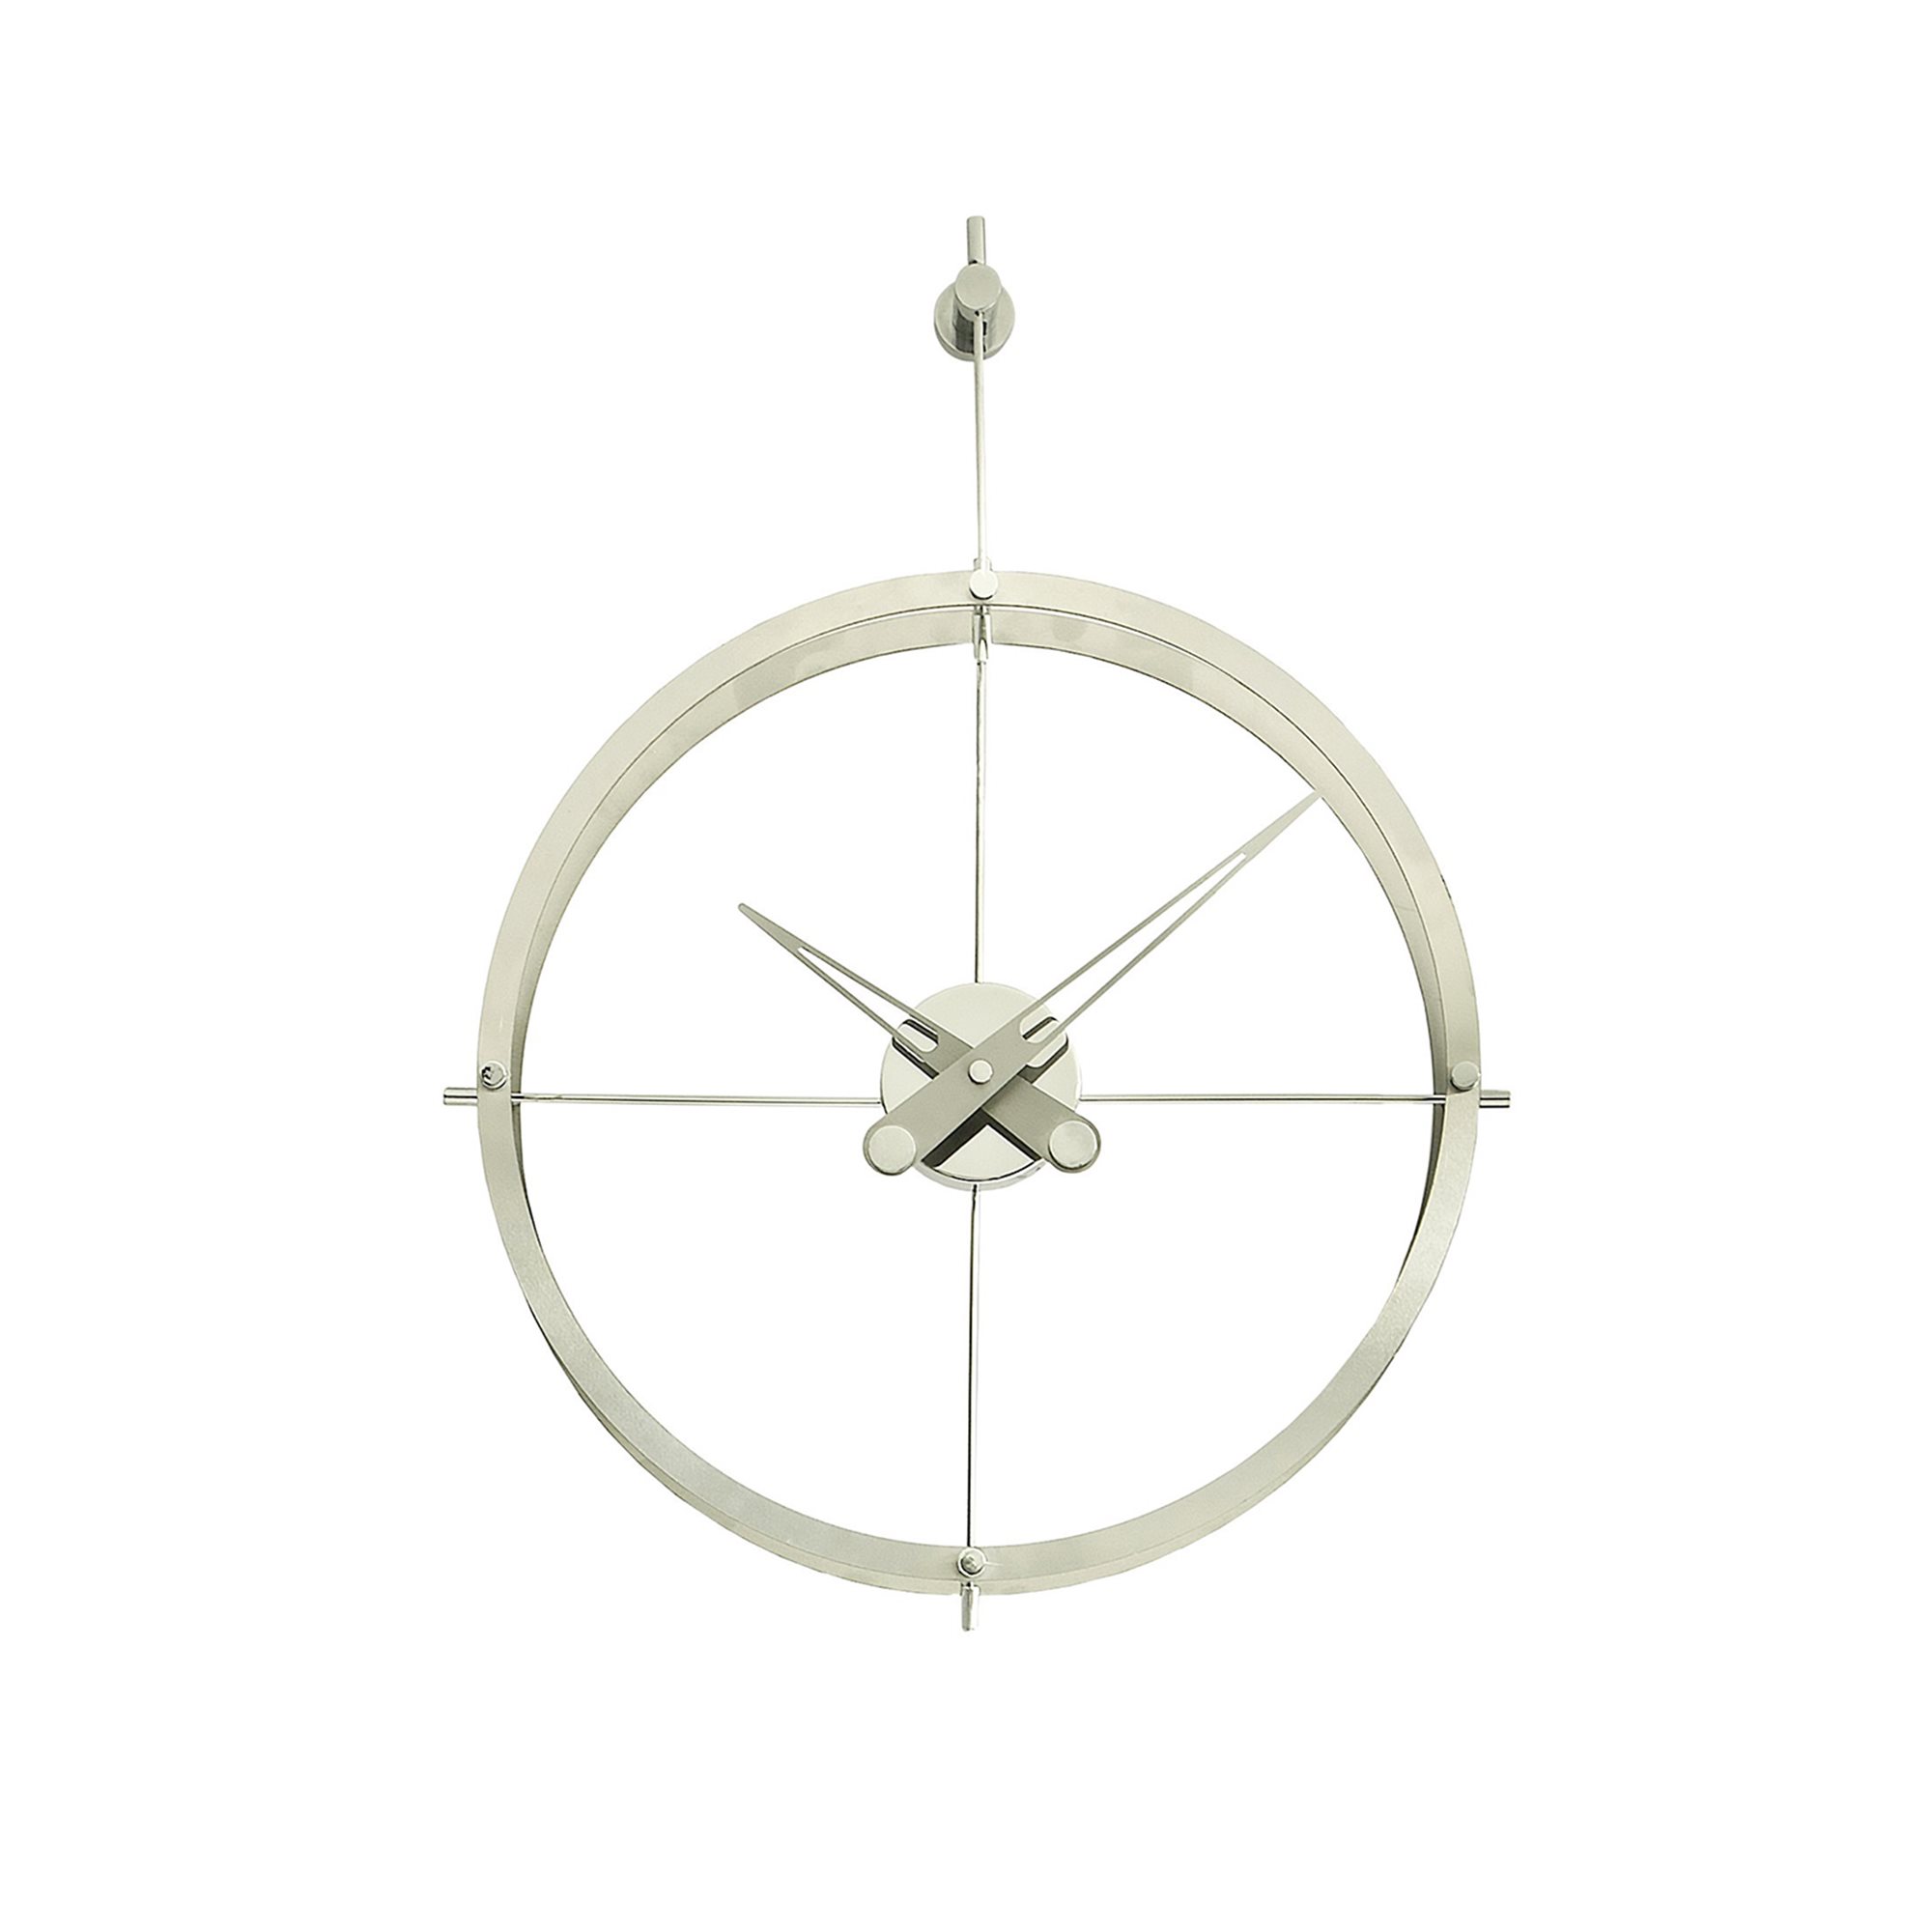 Double Ring Wall Clock (43 cm) - Stainless Steel